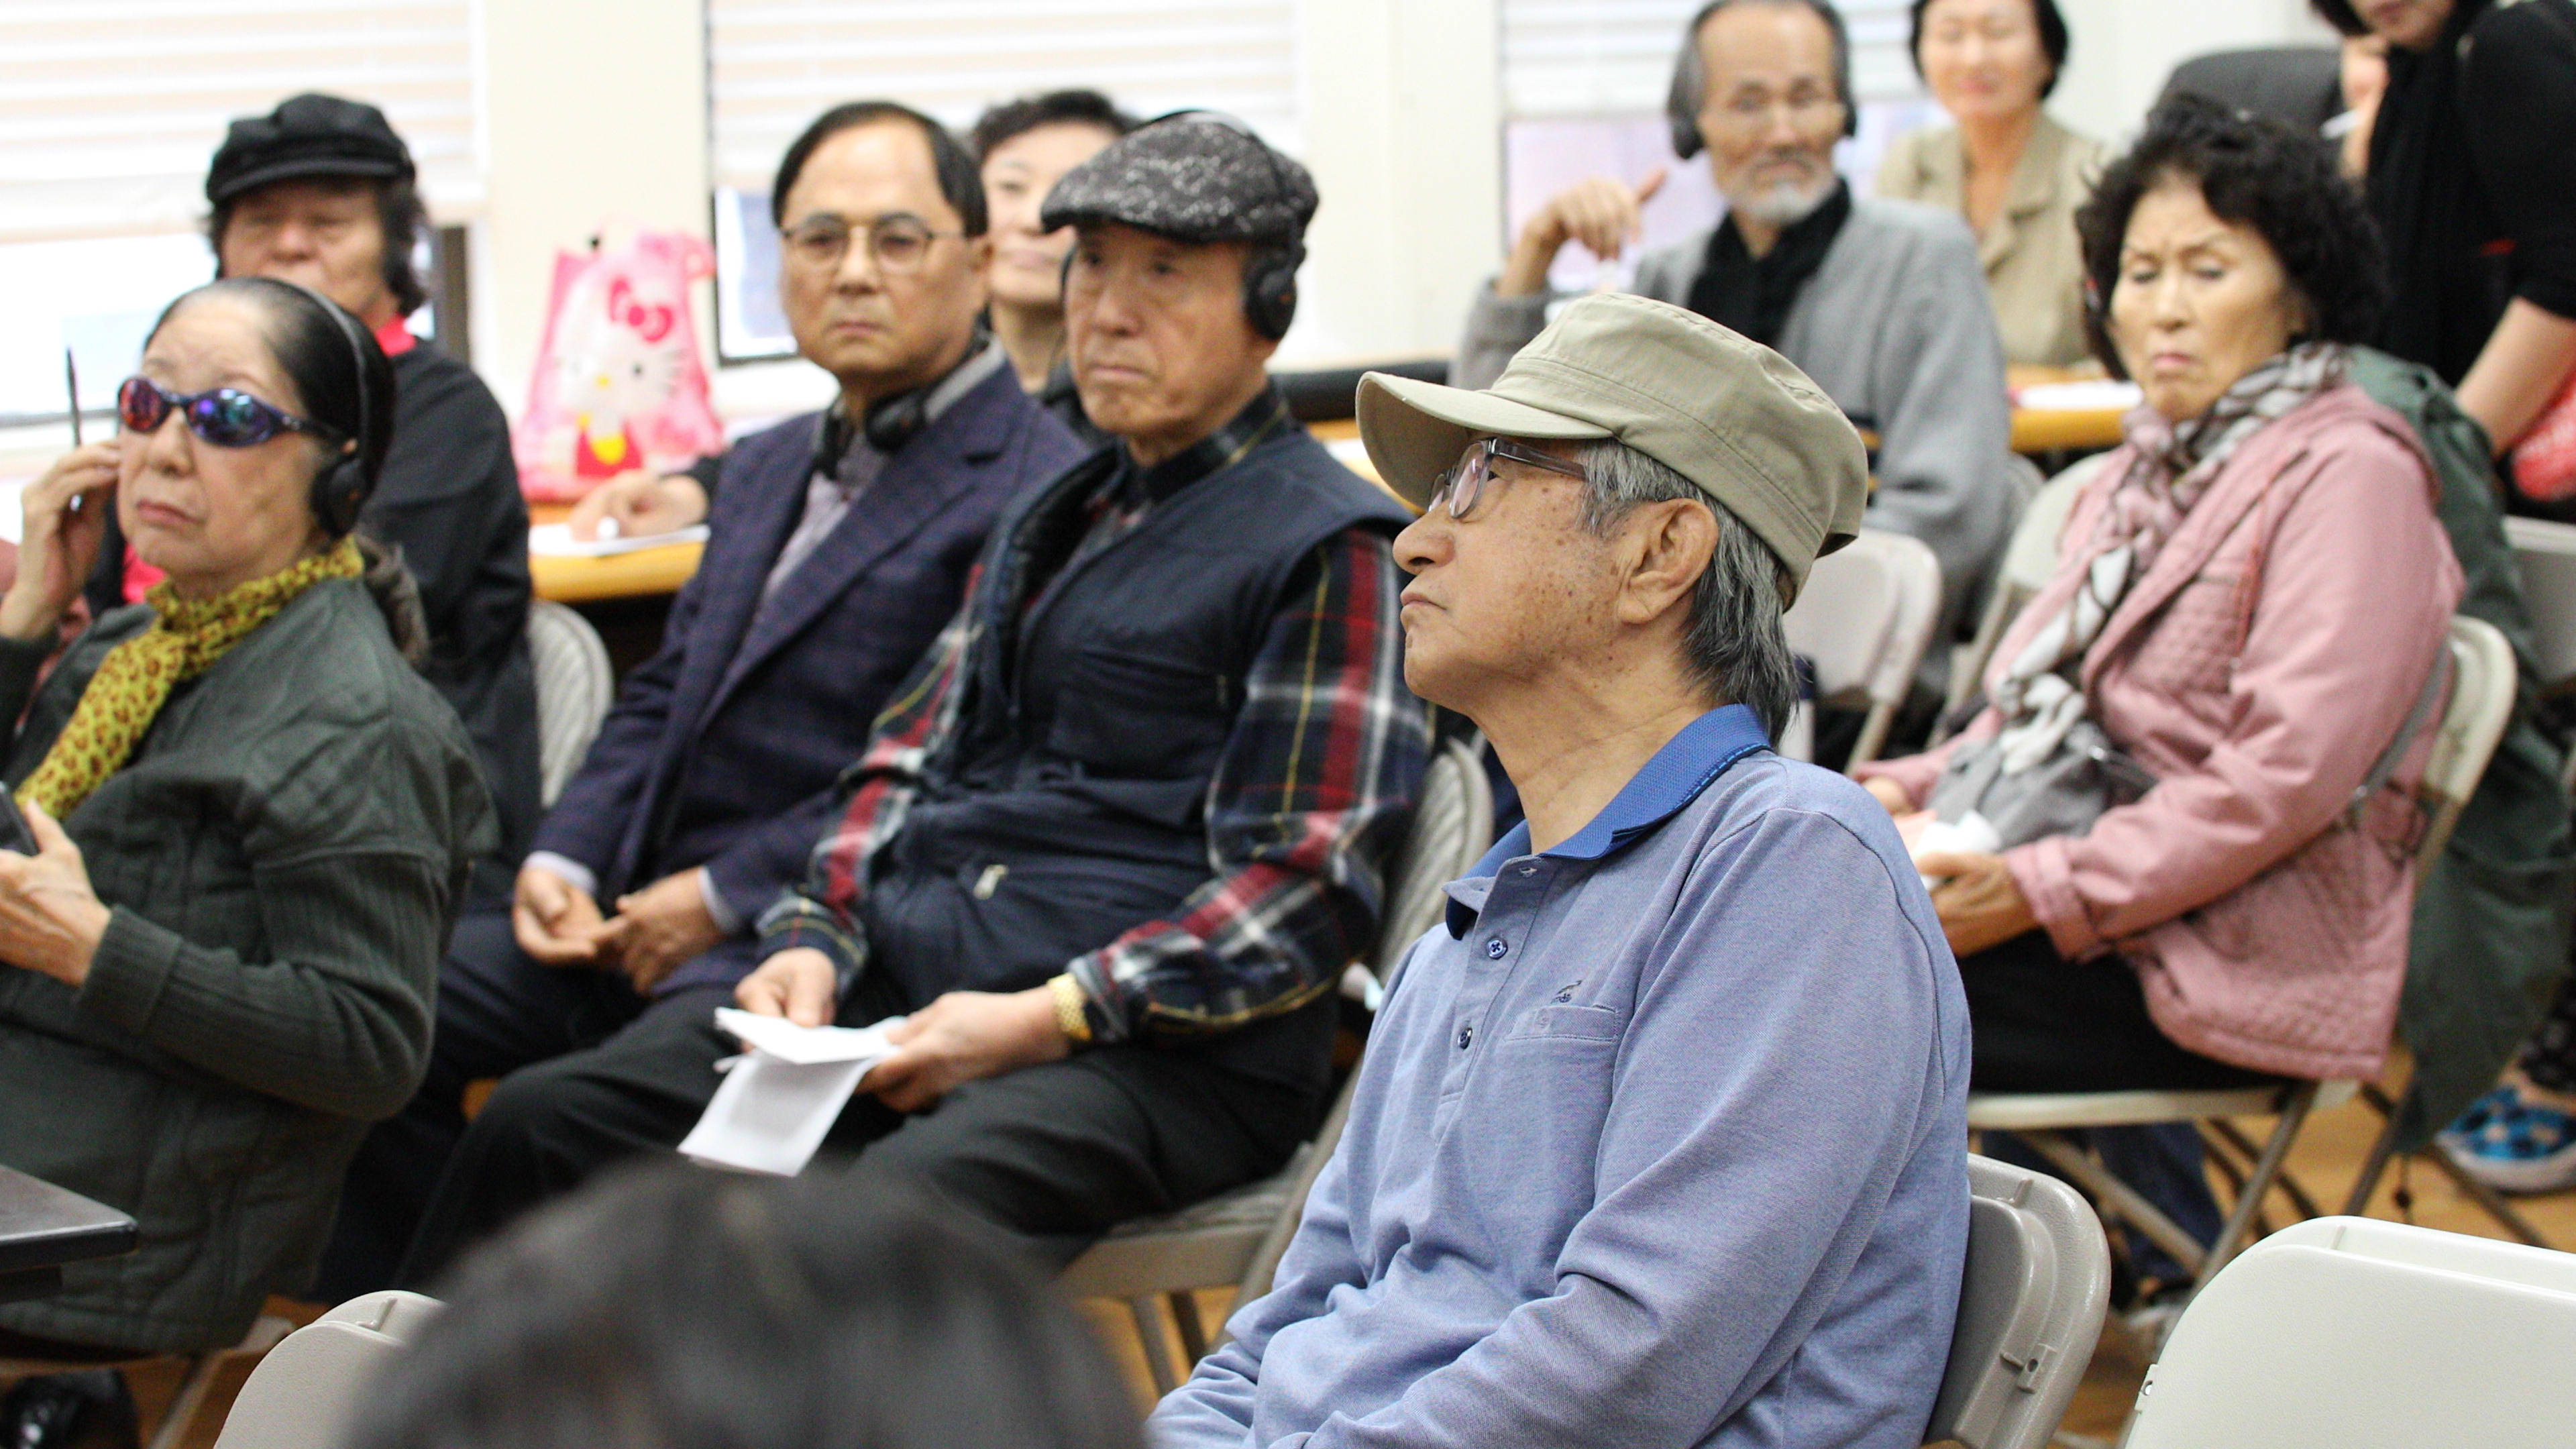 KAC members during a Listening Session.